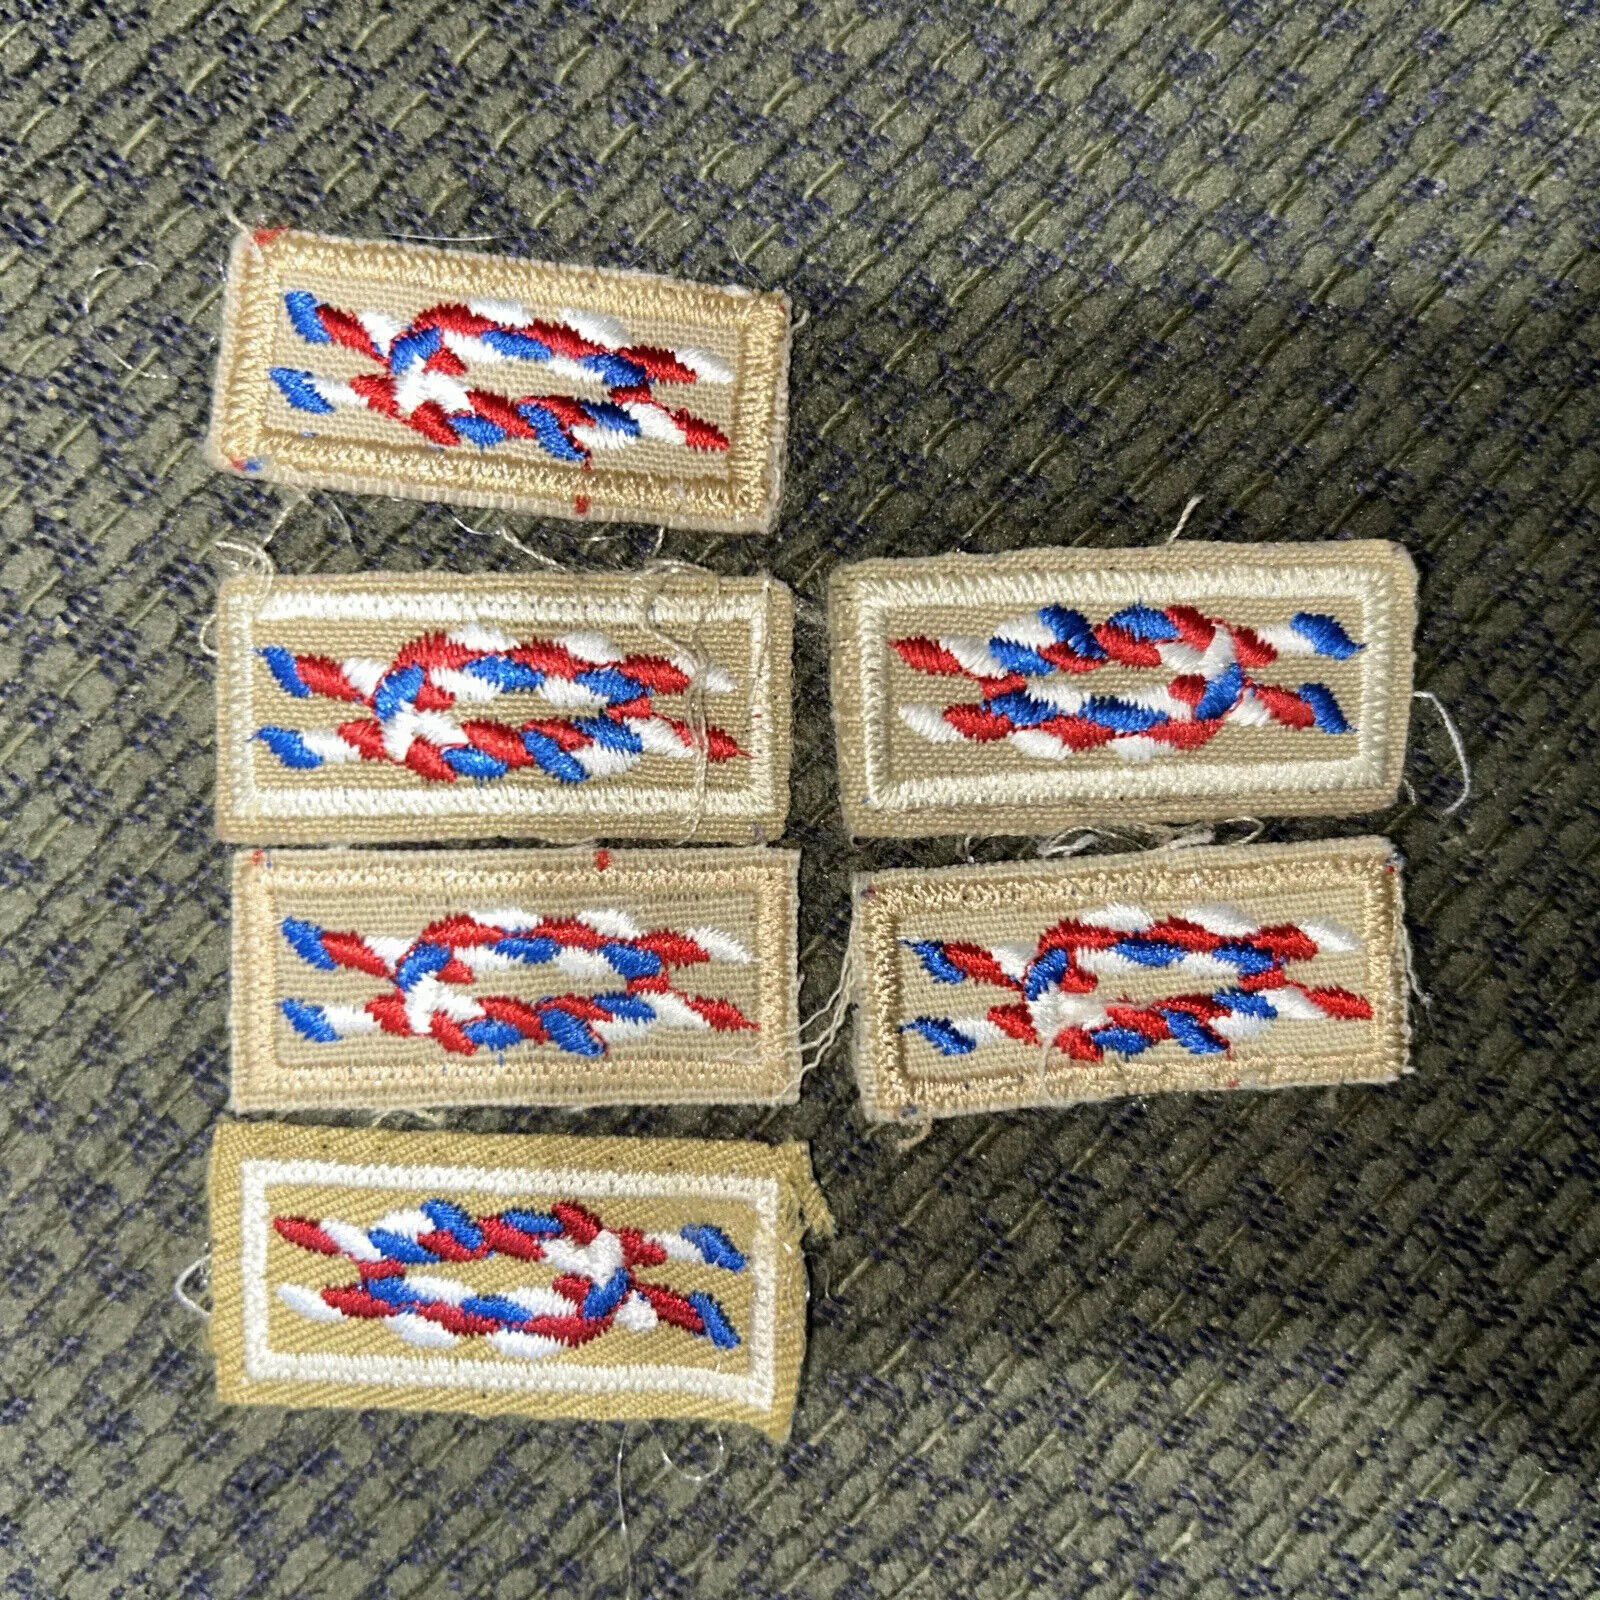 Current Style Boy Scout Eagle Scout Award Knot